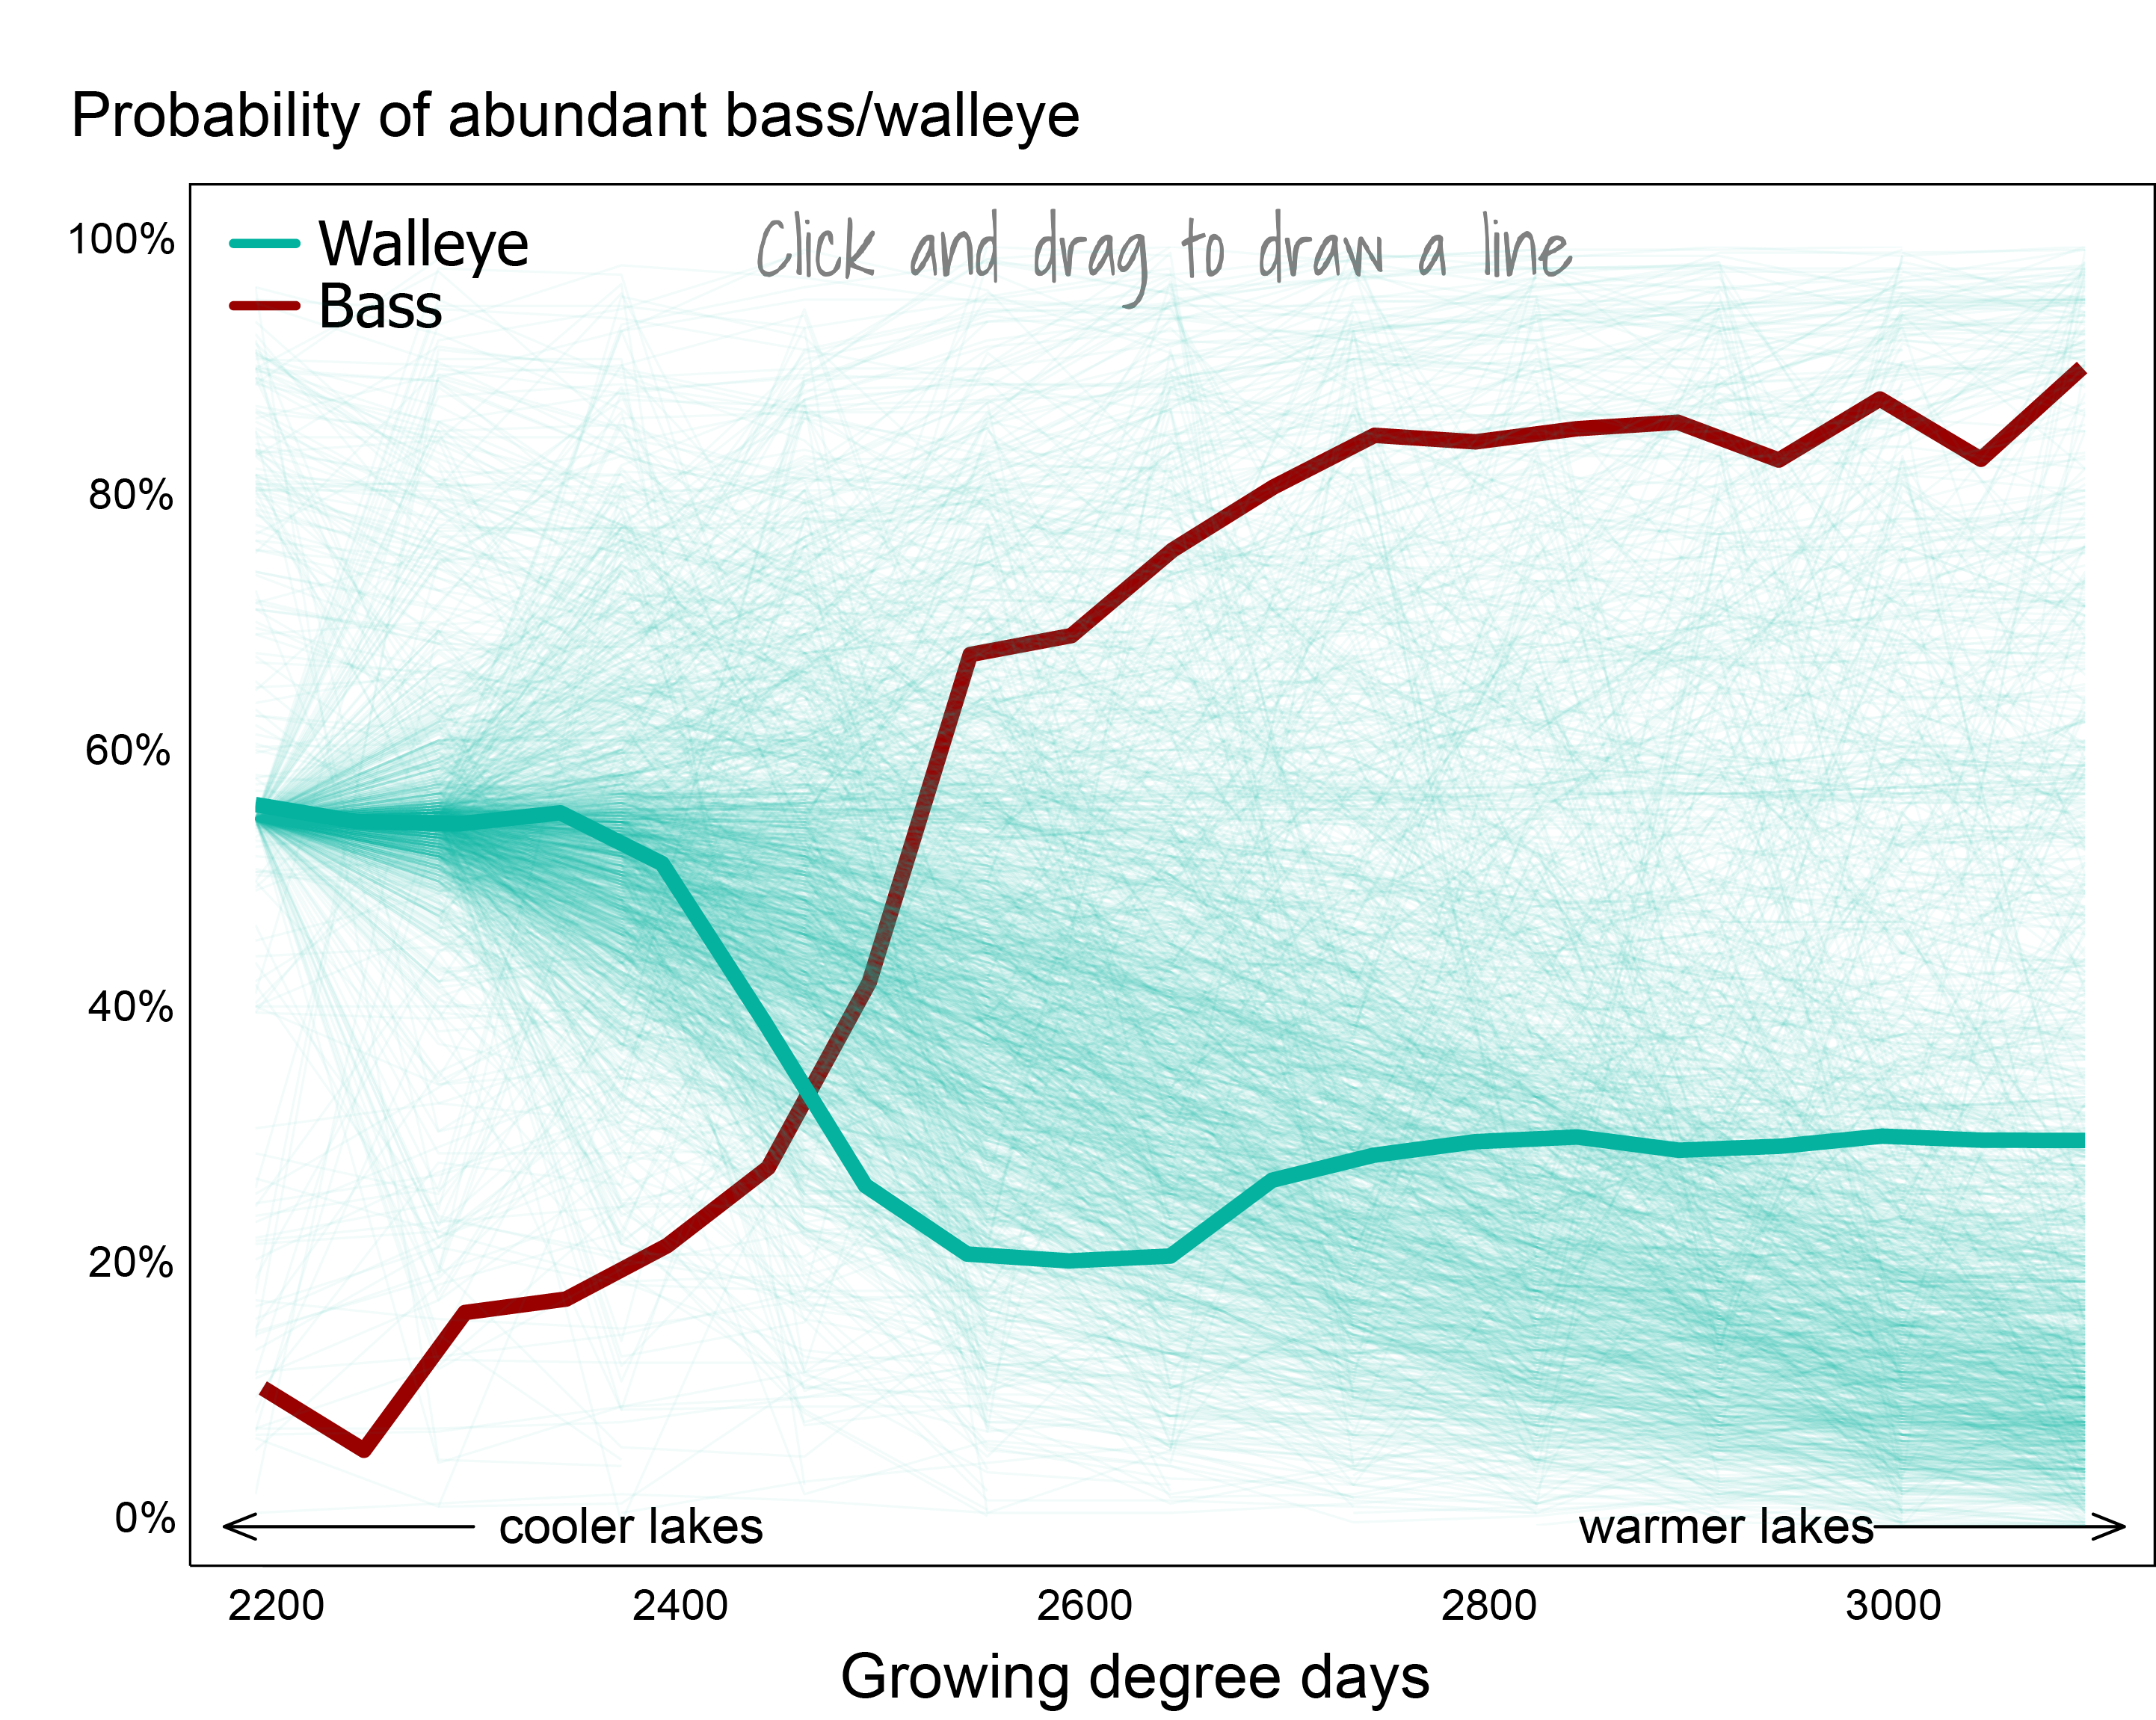 A plot depicting predicted probability of a lake supporting successful walleye reproduction and high largemouth bass abundance as a function of water temperature (growing degree days). Probabilities are based on a statistical model that incorporates other lake characteristics such as water clarity and lake size. Image comes from https://labs.waterdata.usgs.gov/visualizations/climate-change-walleye-bass/index.html. Pattern shows that abundance of walleye generally decreases with warmer temperatures in this range while abundance of bass generally increases with warmer temperatures. Overlaid in a lighter lineweight but similar color to the walleye line are 1550 gueses by visitors to the data visualization as to what they thought the walleye pattern was before it was revealed. There is a lot of variability in the guesses, but the majority of guesses do correctly predict that walleye are less likely to be abundant in warmer temperatures.